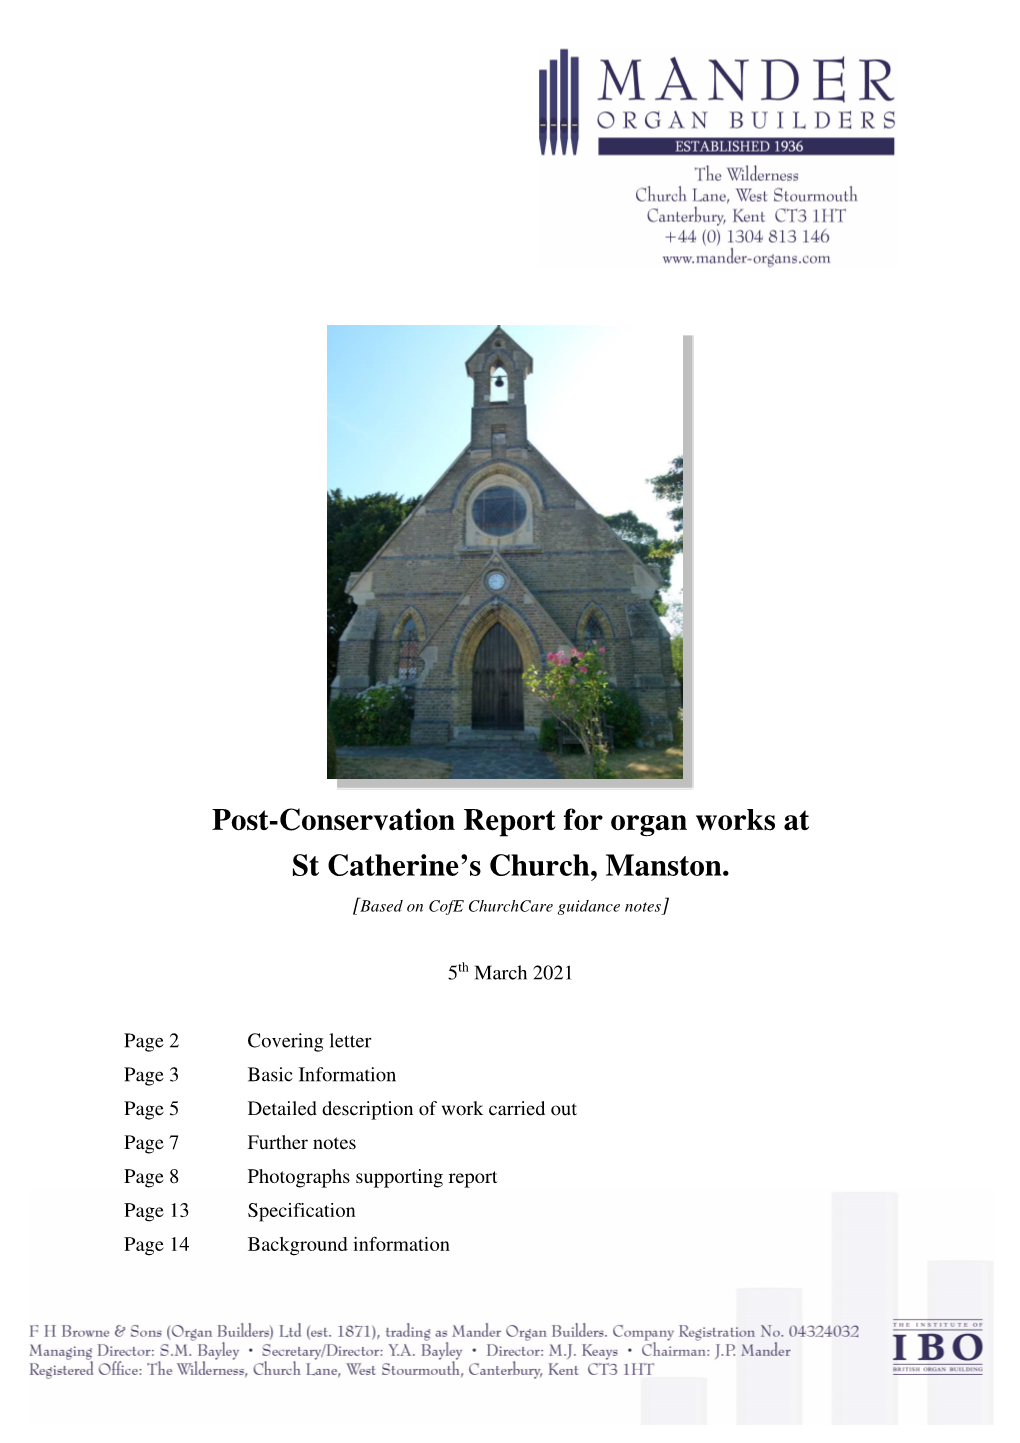 Post-Conservation Report for Organ Works at St Catherine's Church